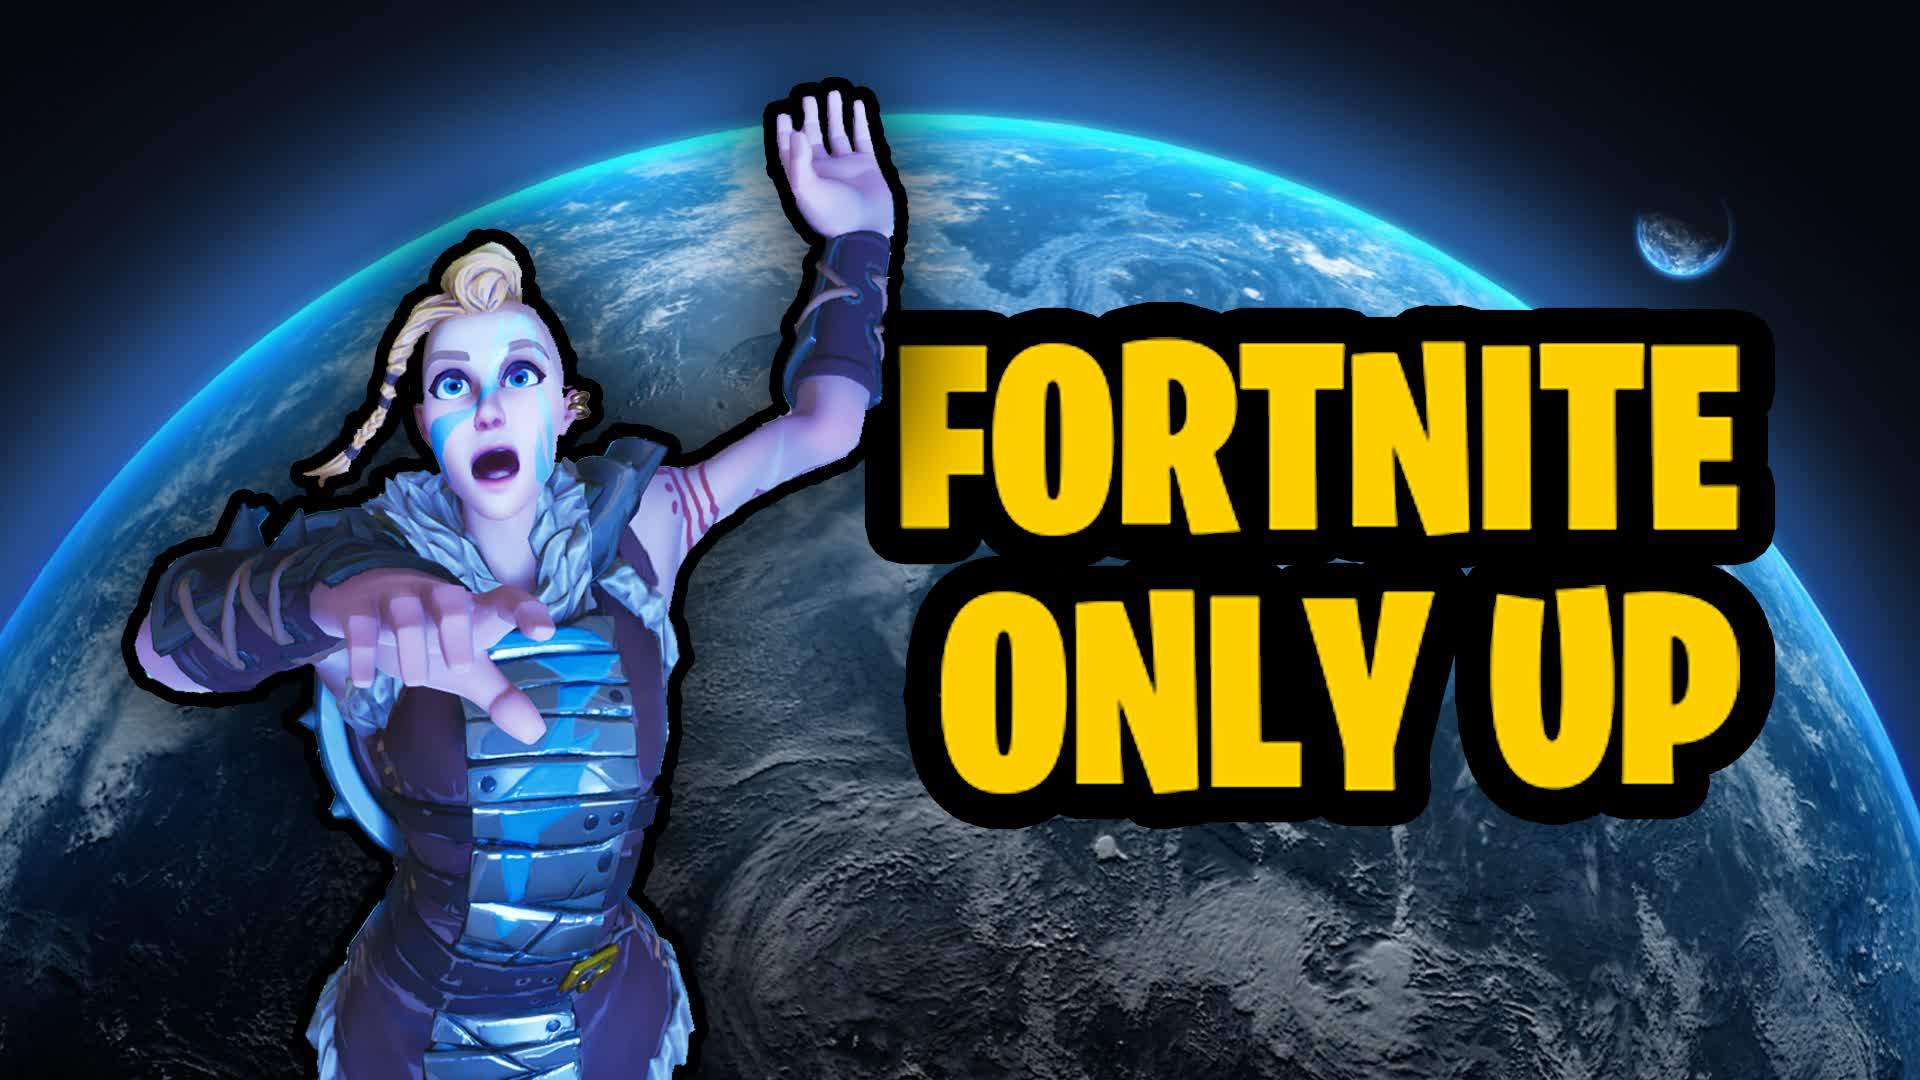 ONLY UP FORTNITE!